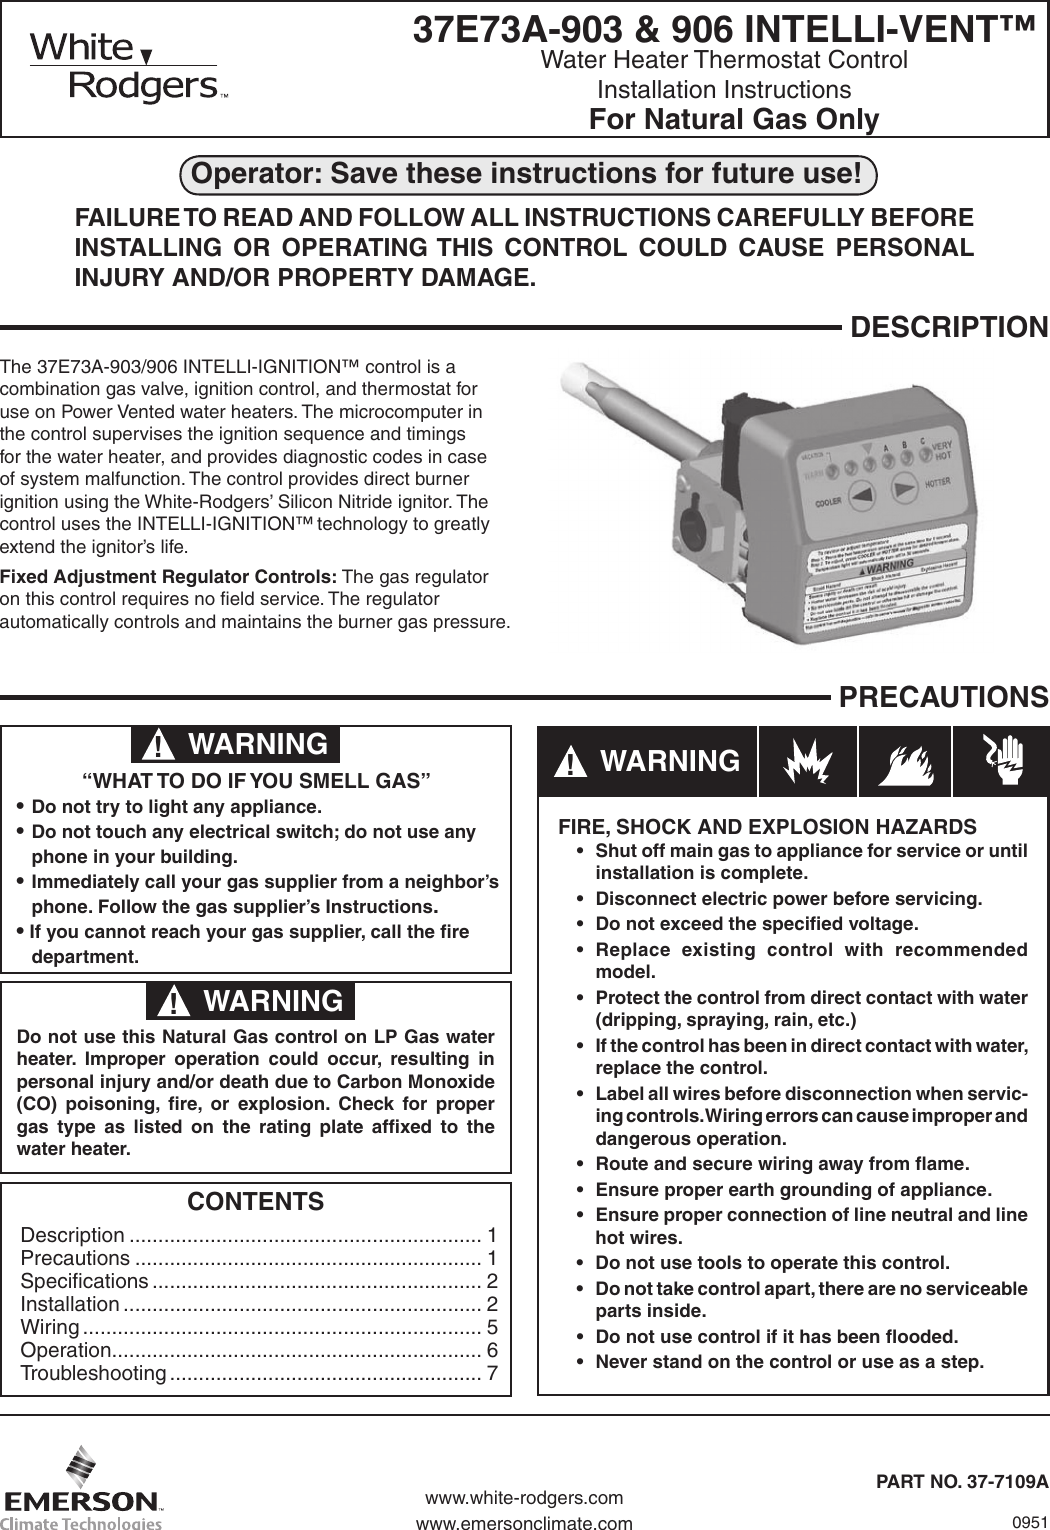 Page 1 of 8 - White-Rodgers White-Rodgers-37E73A-903-Intelli-Vent-Control-For-Power-Vented-Water-Heaters-Installation-Instructions- 37E73A-903_Intellivent_37-7109A  White-rodgers-37e73a-903-intelli-vent-control-for-power-vented-water-heaters-installation-instructions